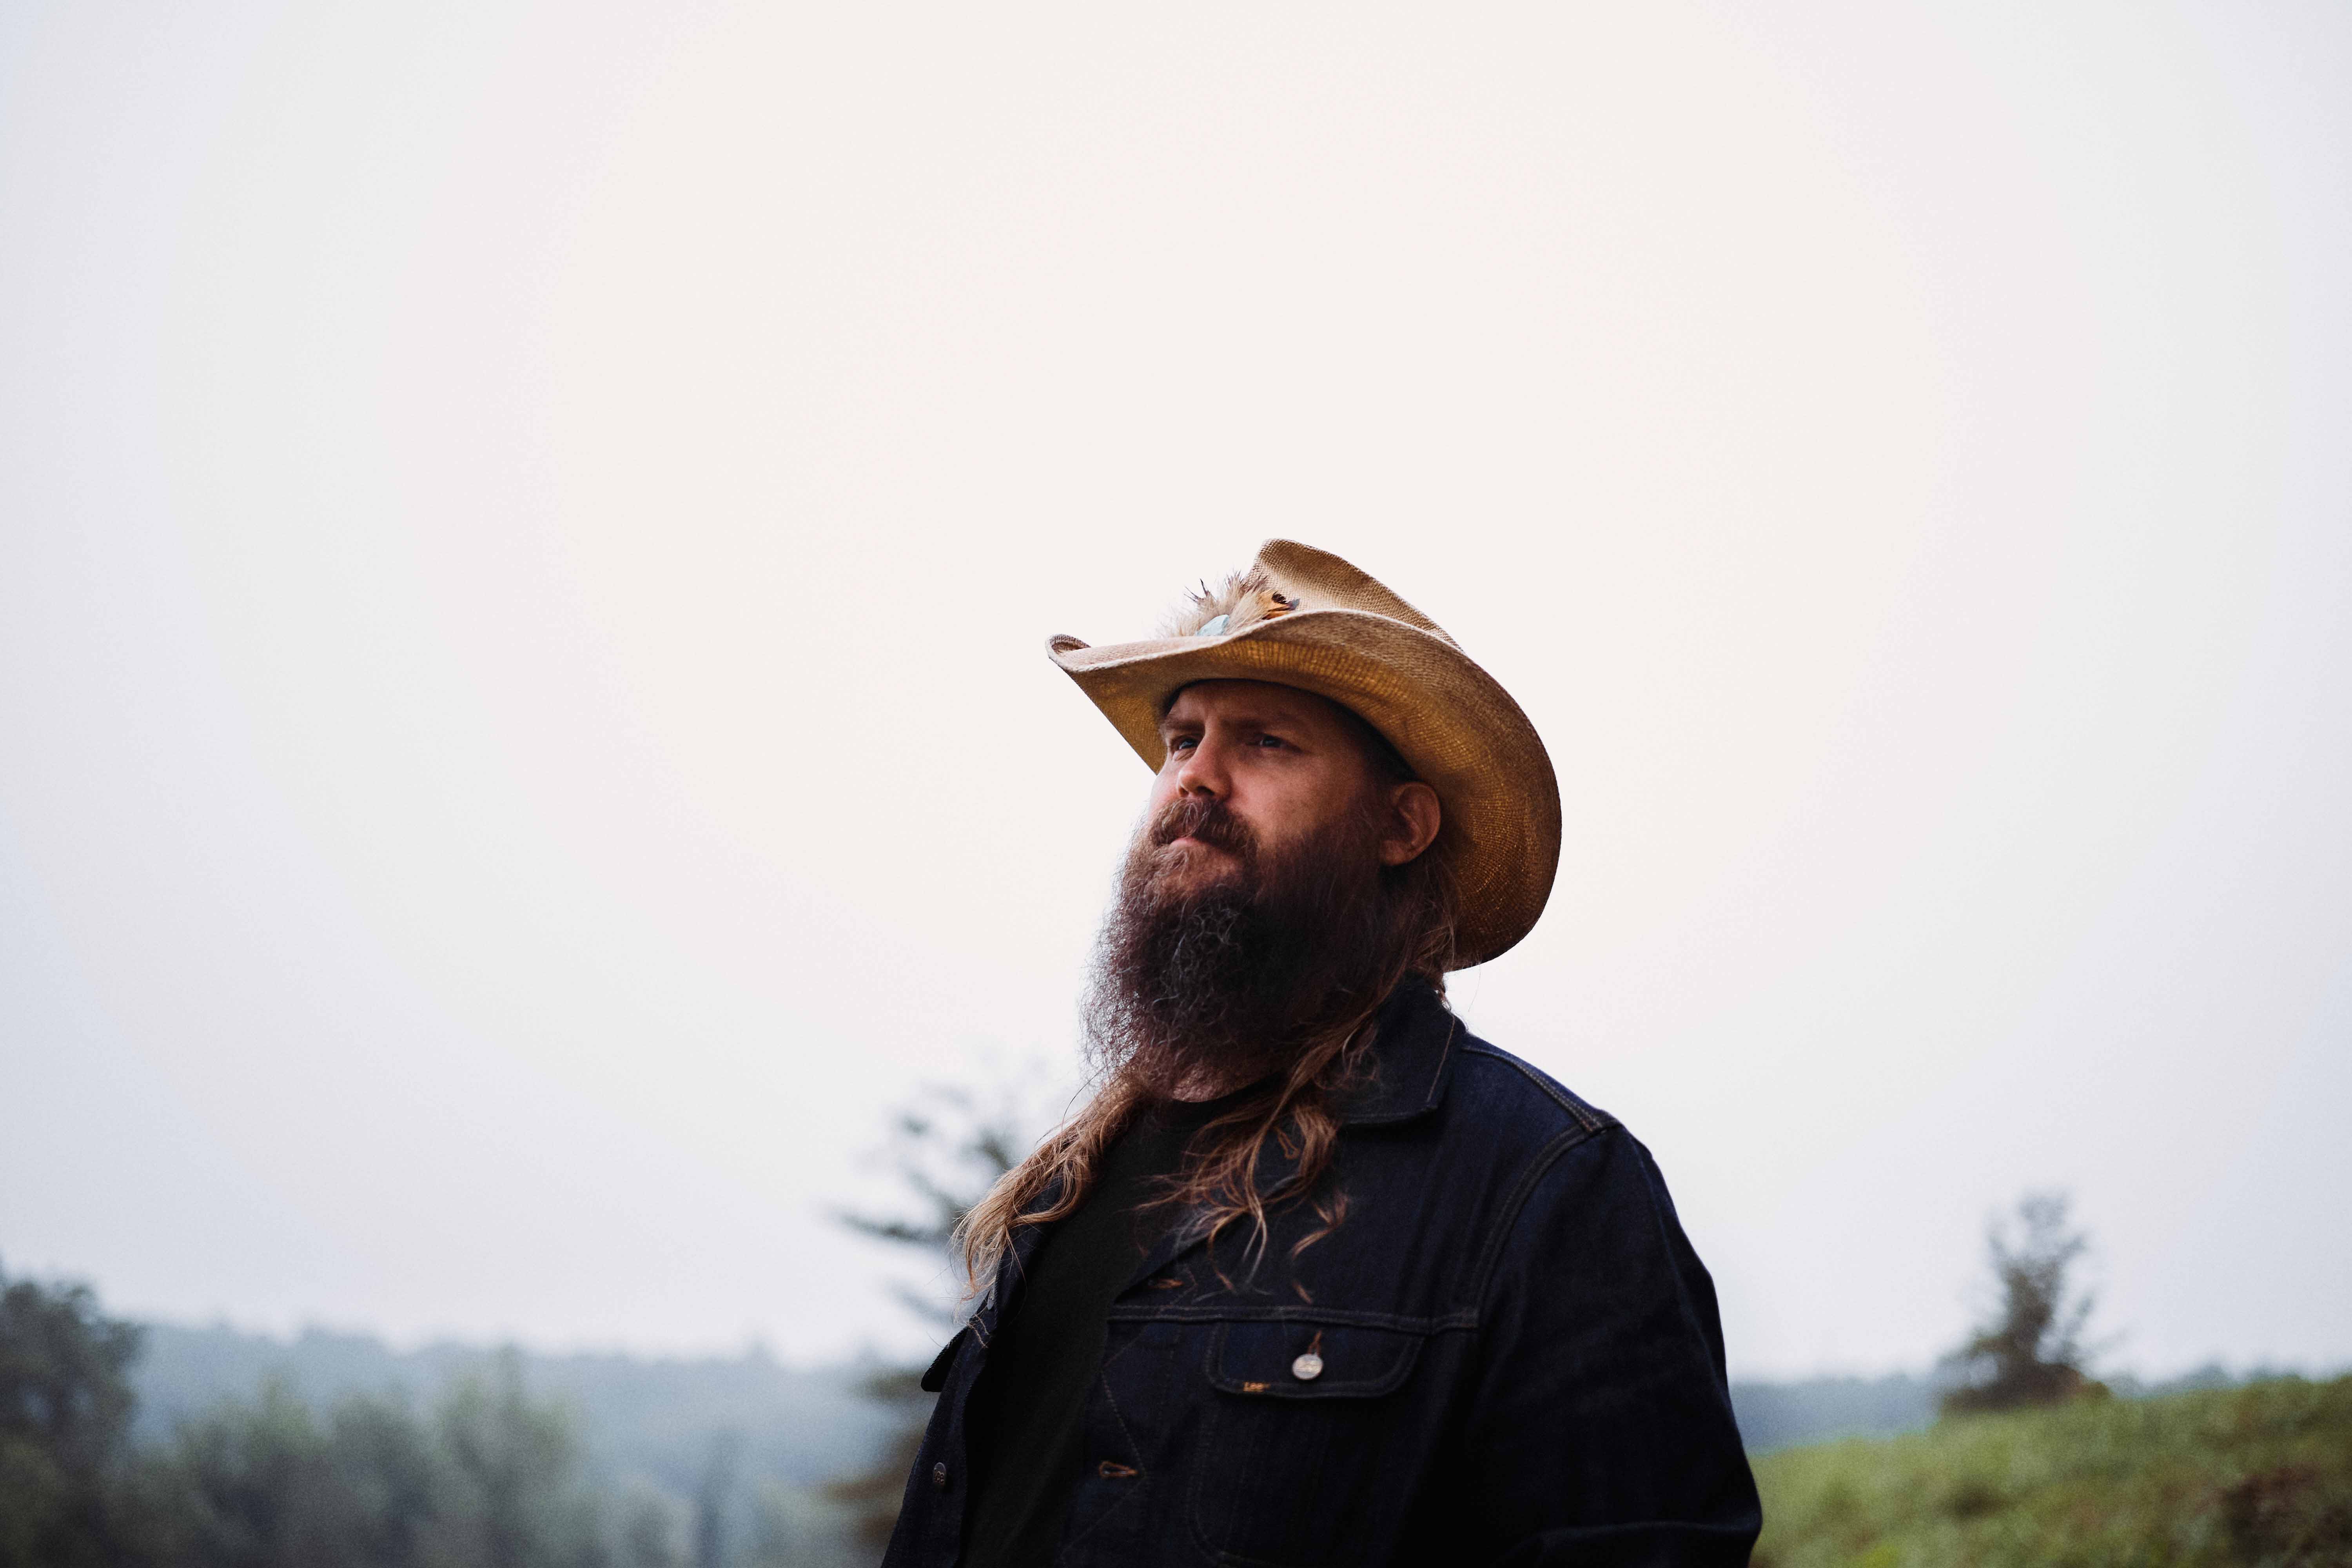 exclusive presale code for Chris Stapleton's All American Road Show Goes Across the Pond advanced tickets in Glasgow